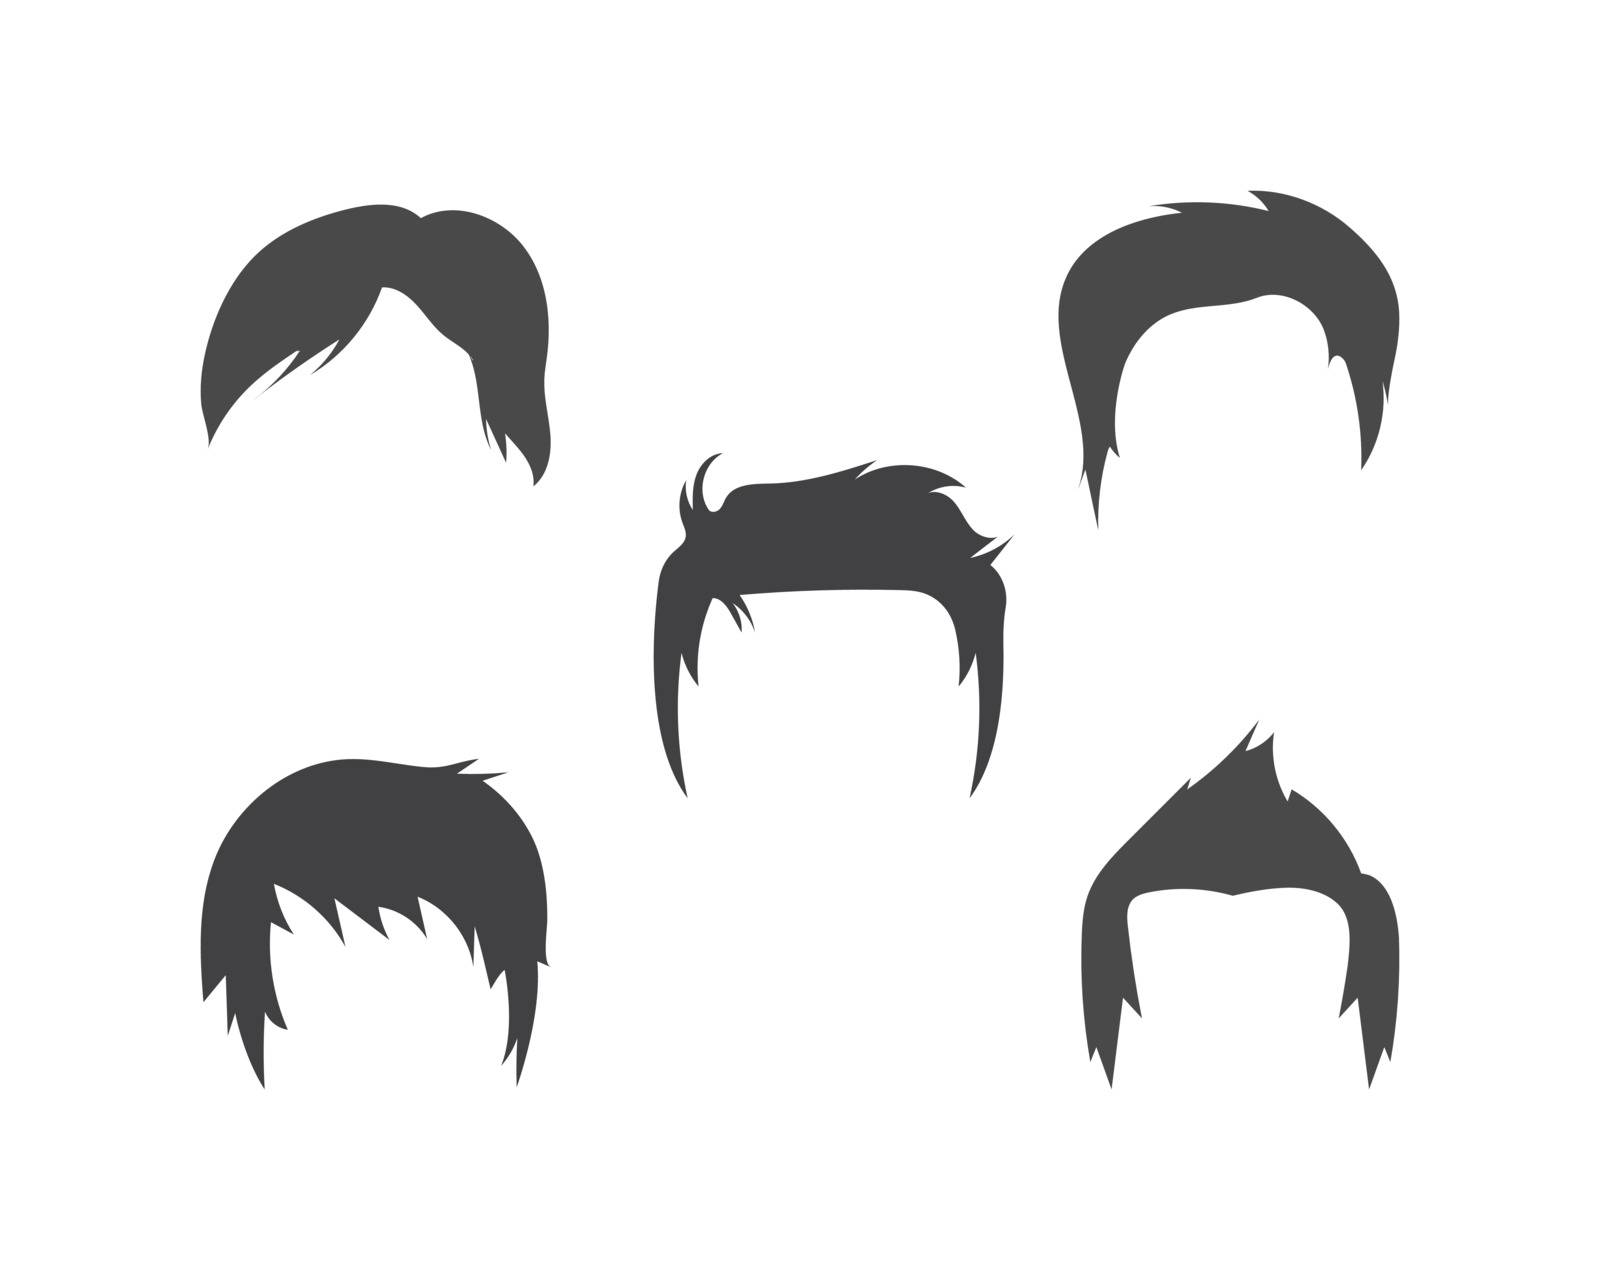 man hairstyle element icon vector illustration by idan